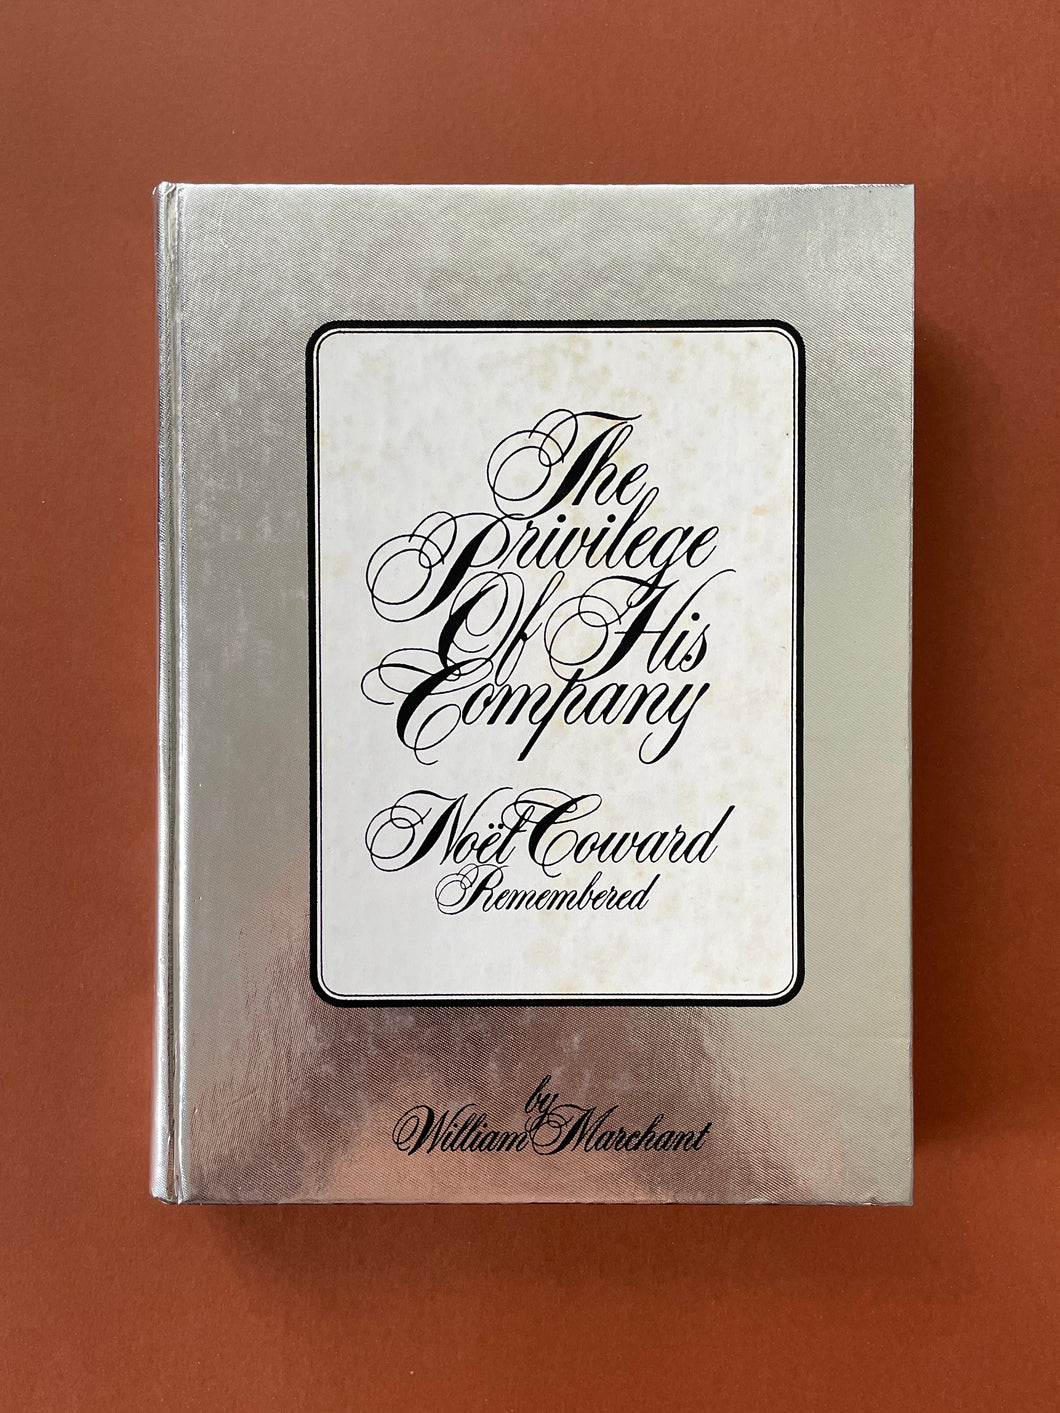 The Privilege of His Company-Noel Coward Remembered by William Marchant: photo of the front cover which shows very minor scuff marks, and faint but obvious discolouring on the white part of the cover.